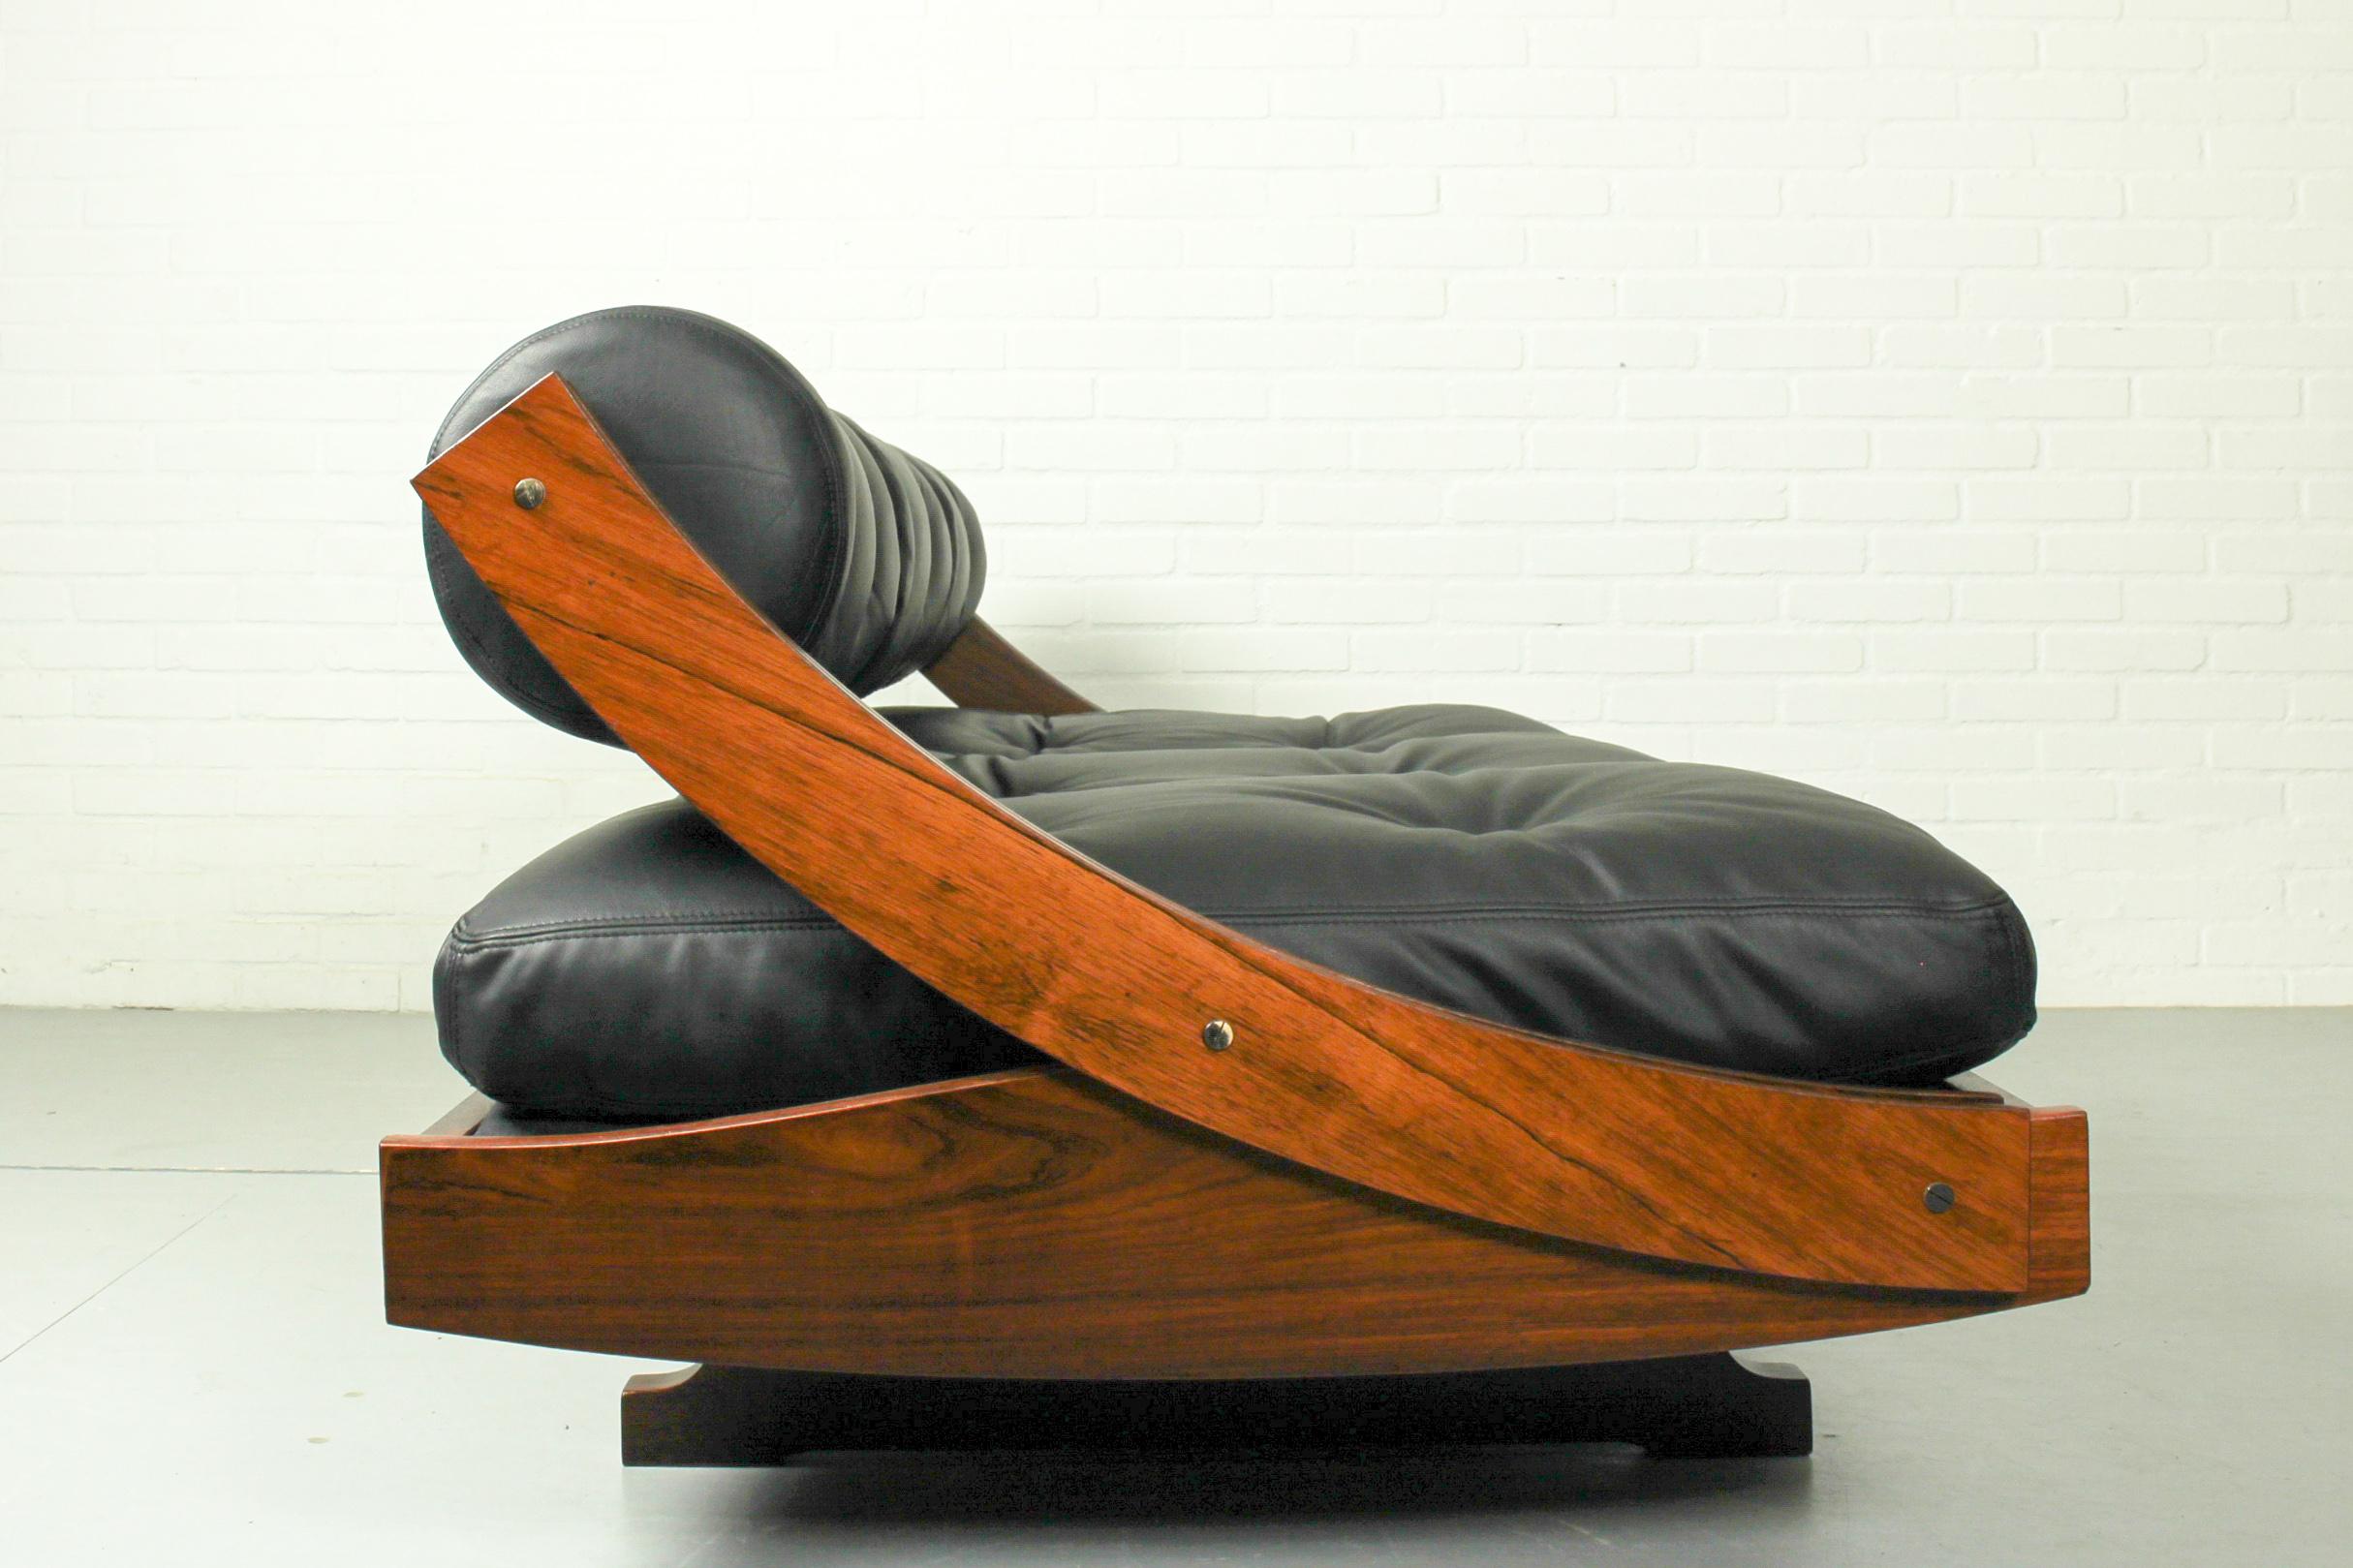 20th Century Rosewood Daybed Sofa GS 195 by Gianni Songia for Sormani in New Black Leather